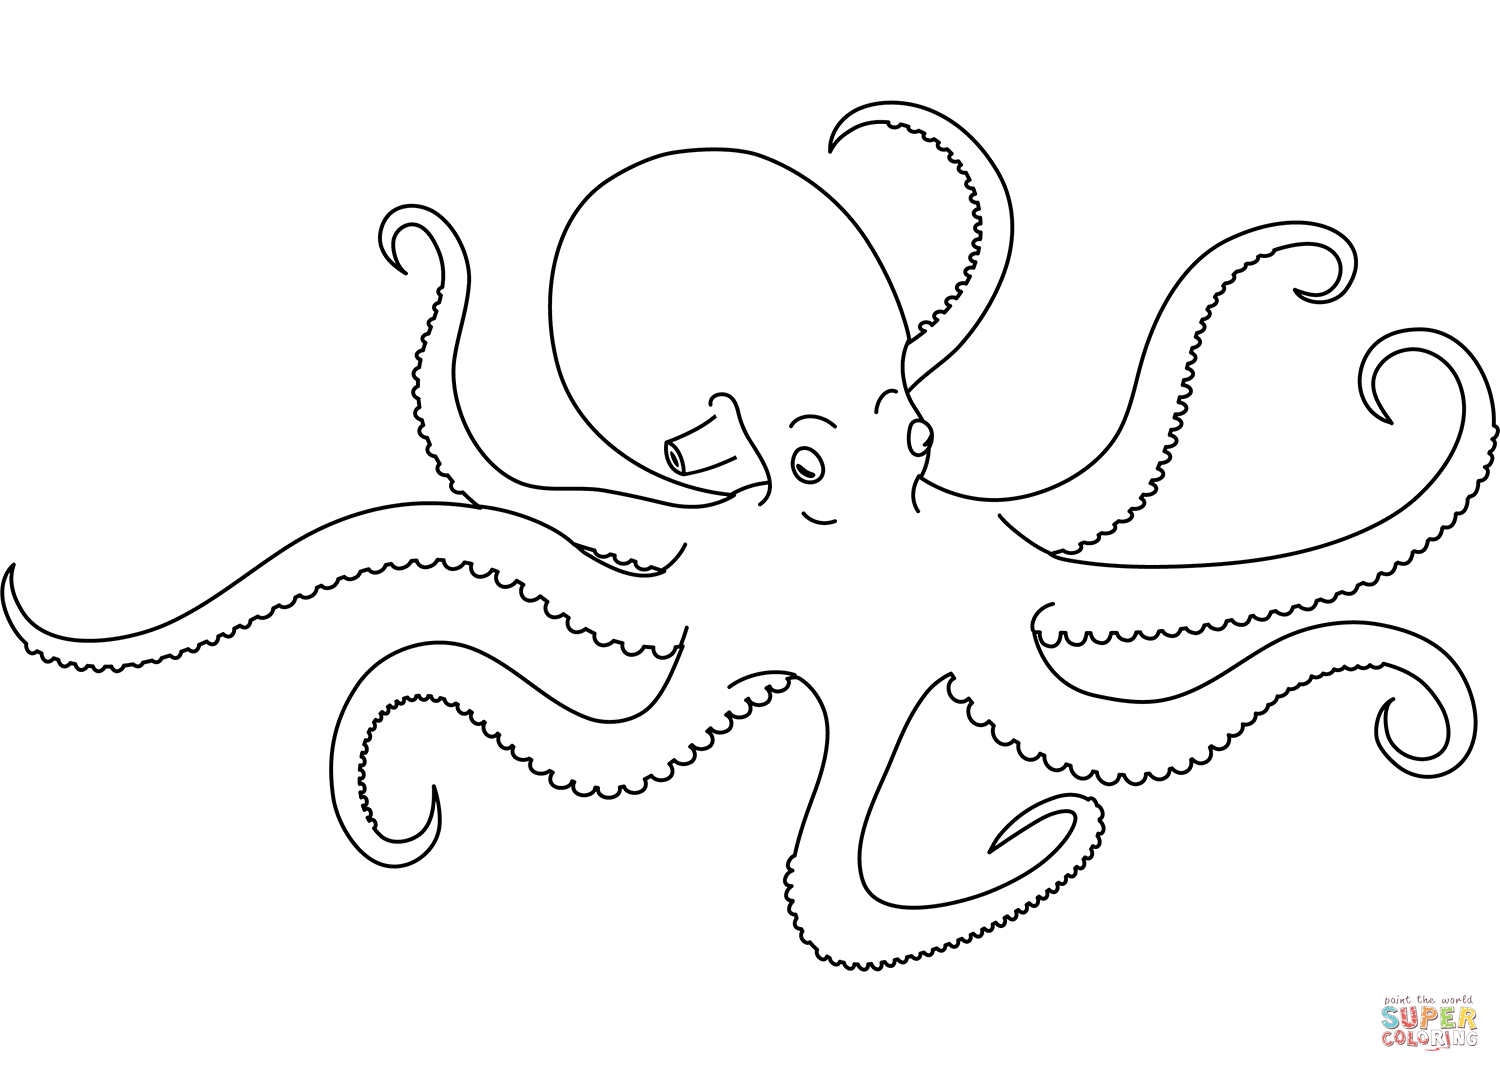 Octopus coloring page free printable coloring pages